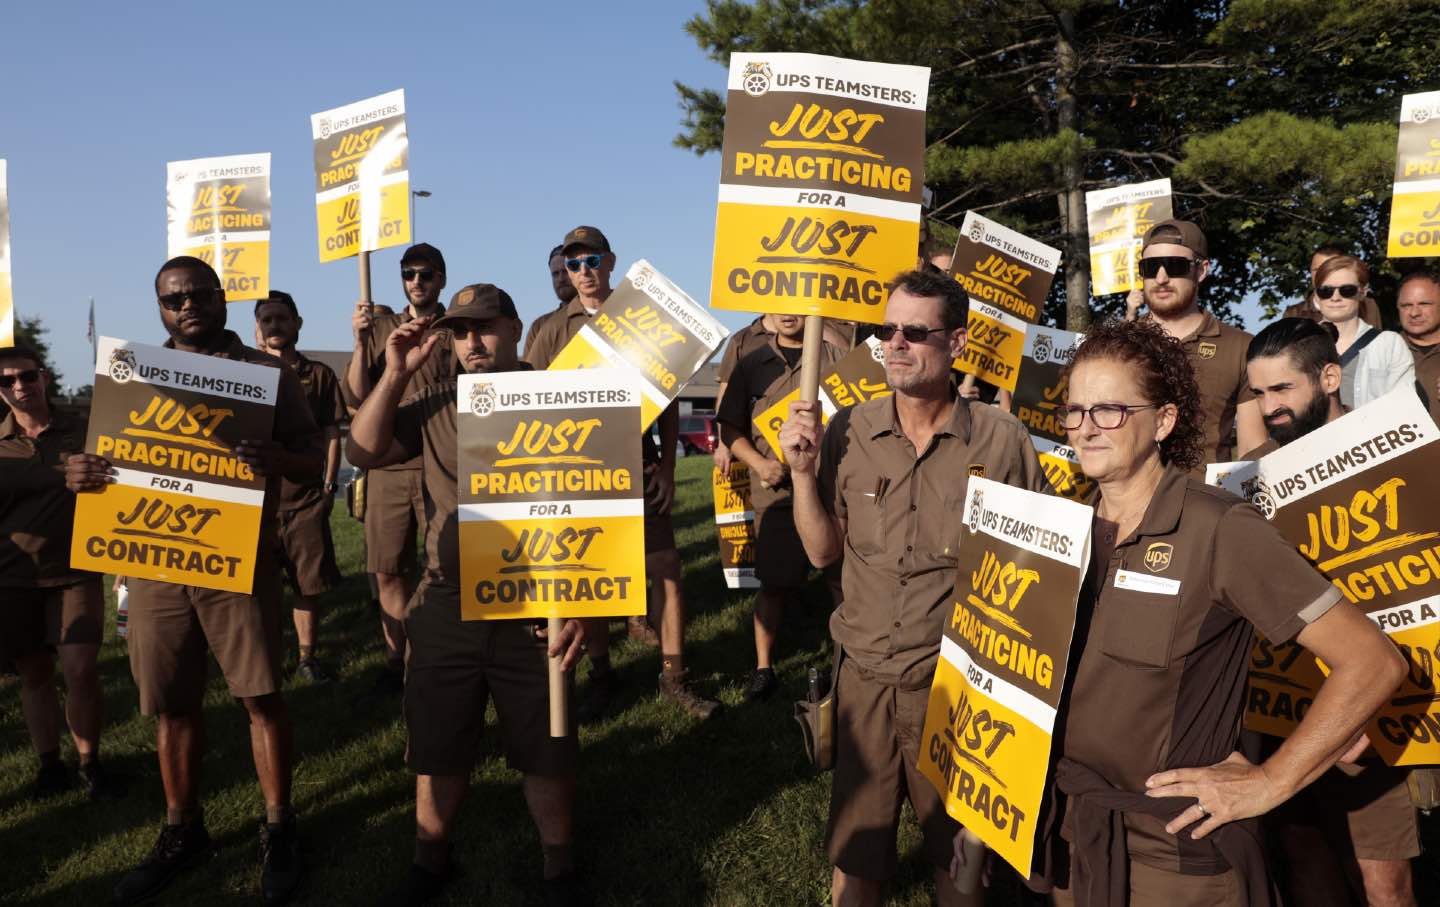 UPS workers and Teamsters members practice picket, hold signs